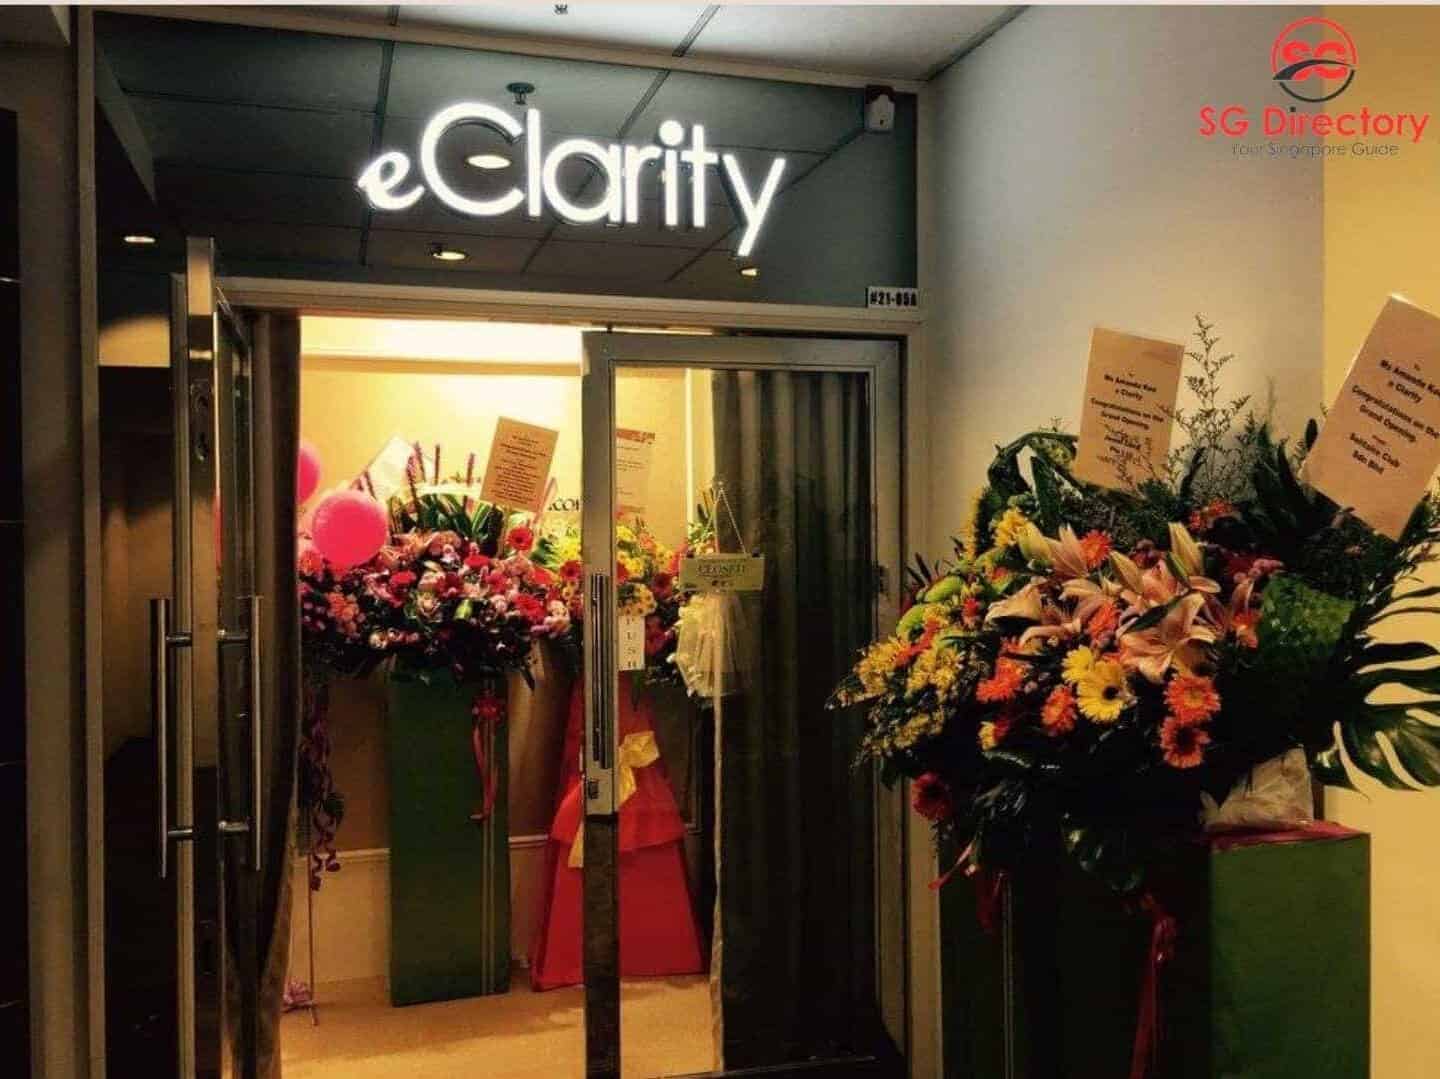 eclarity is the best jewellery singapore, 
Best Jewellery Shops Singapore 2022,
Best Singapore Jewellery brands,
singapore jewellery shop online,
Which jewellery brand is best in singapore,
top jewellery shop in singapore,
list of the best jewellery shop in Singapore
